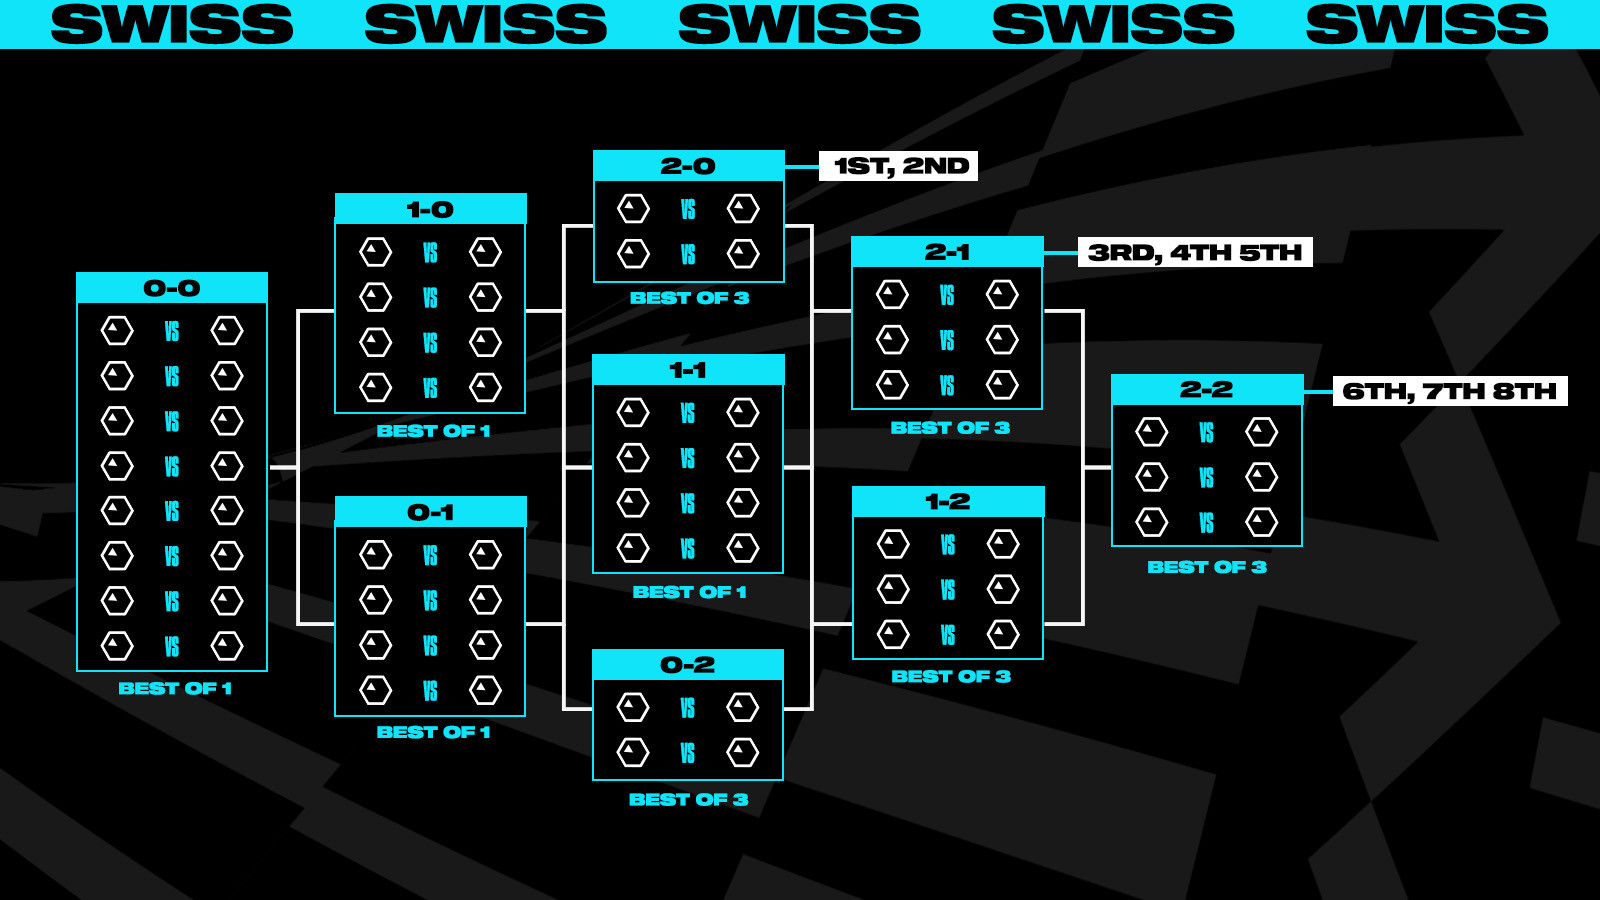 (The Swiss Stage, System of Worlds 2023 Source: Riot Games)